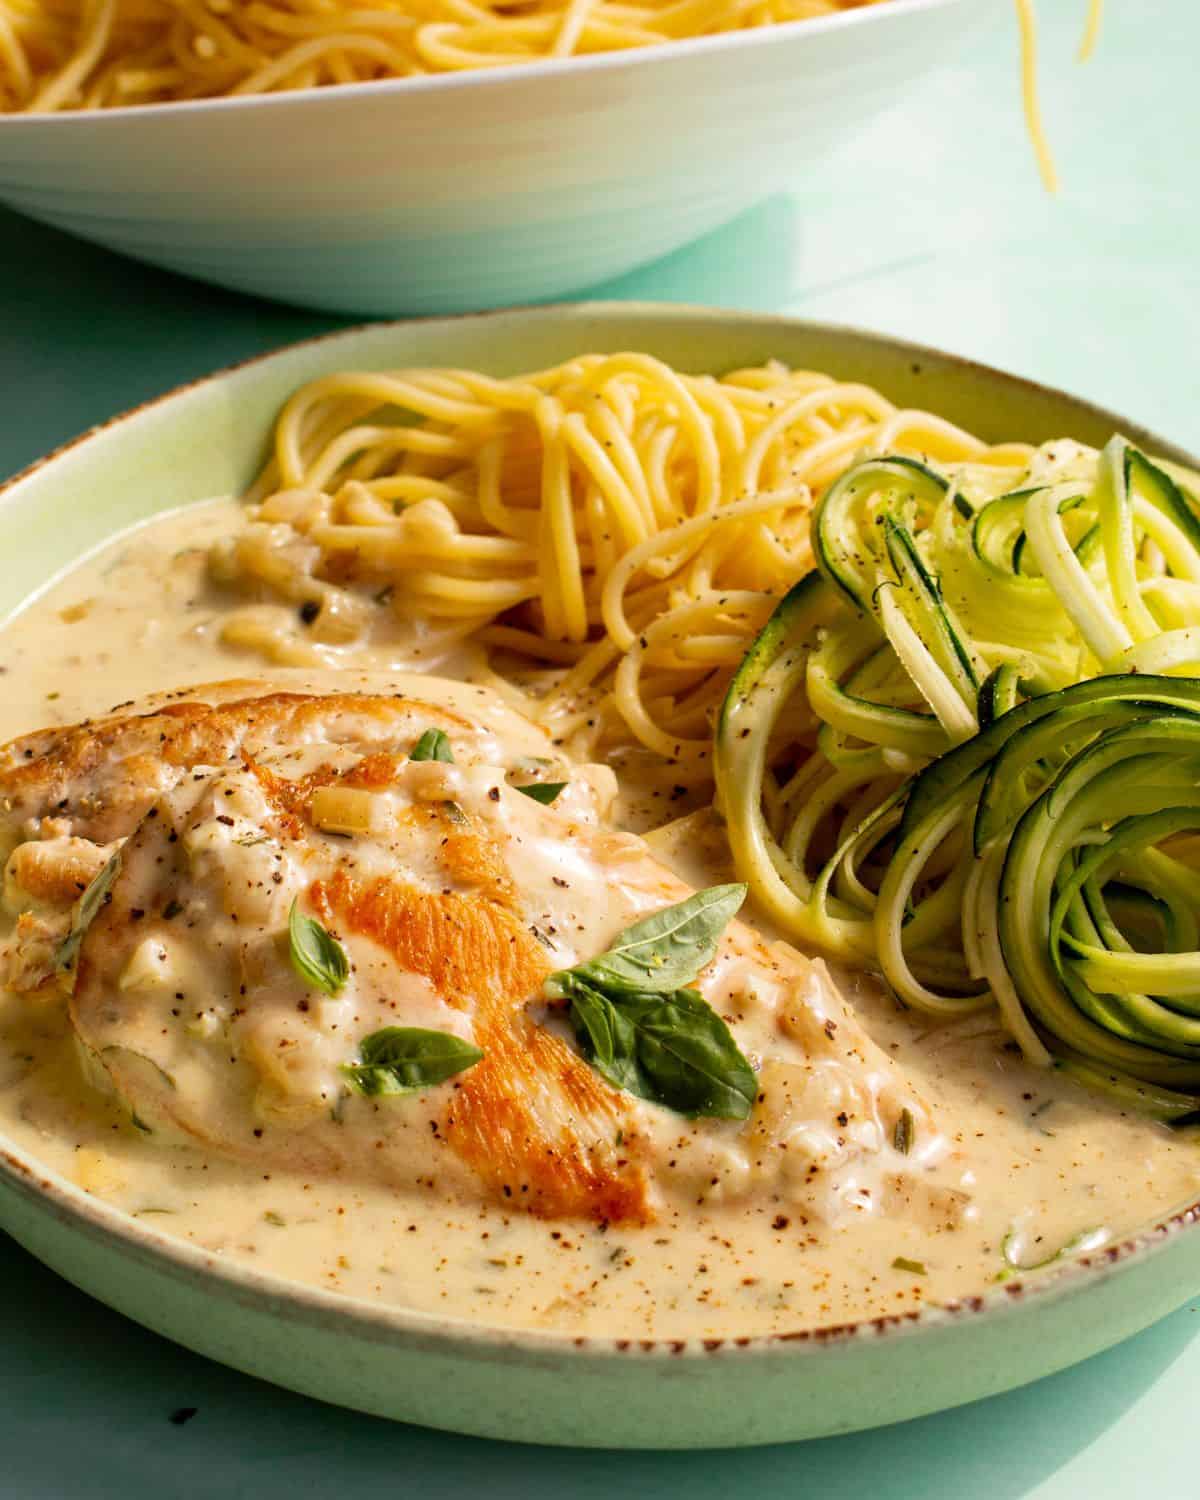 Creamy Philadelphia chicken served with spaghetti and spiralised courgettes and garnished with basil.